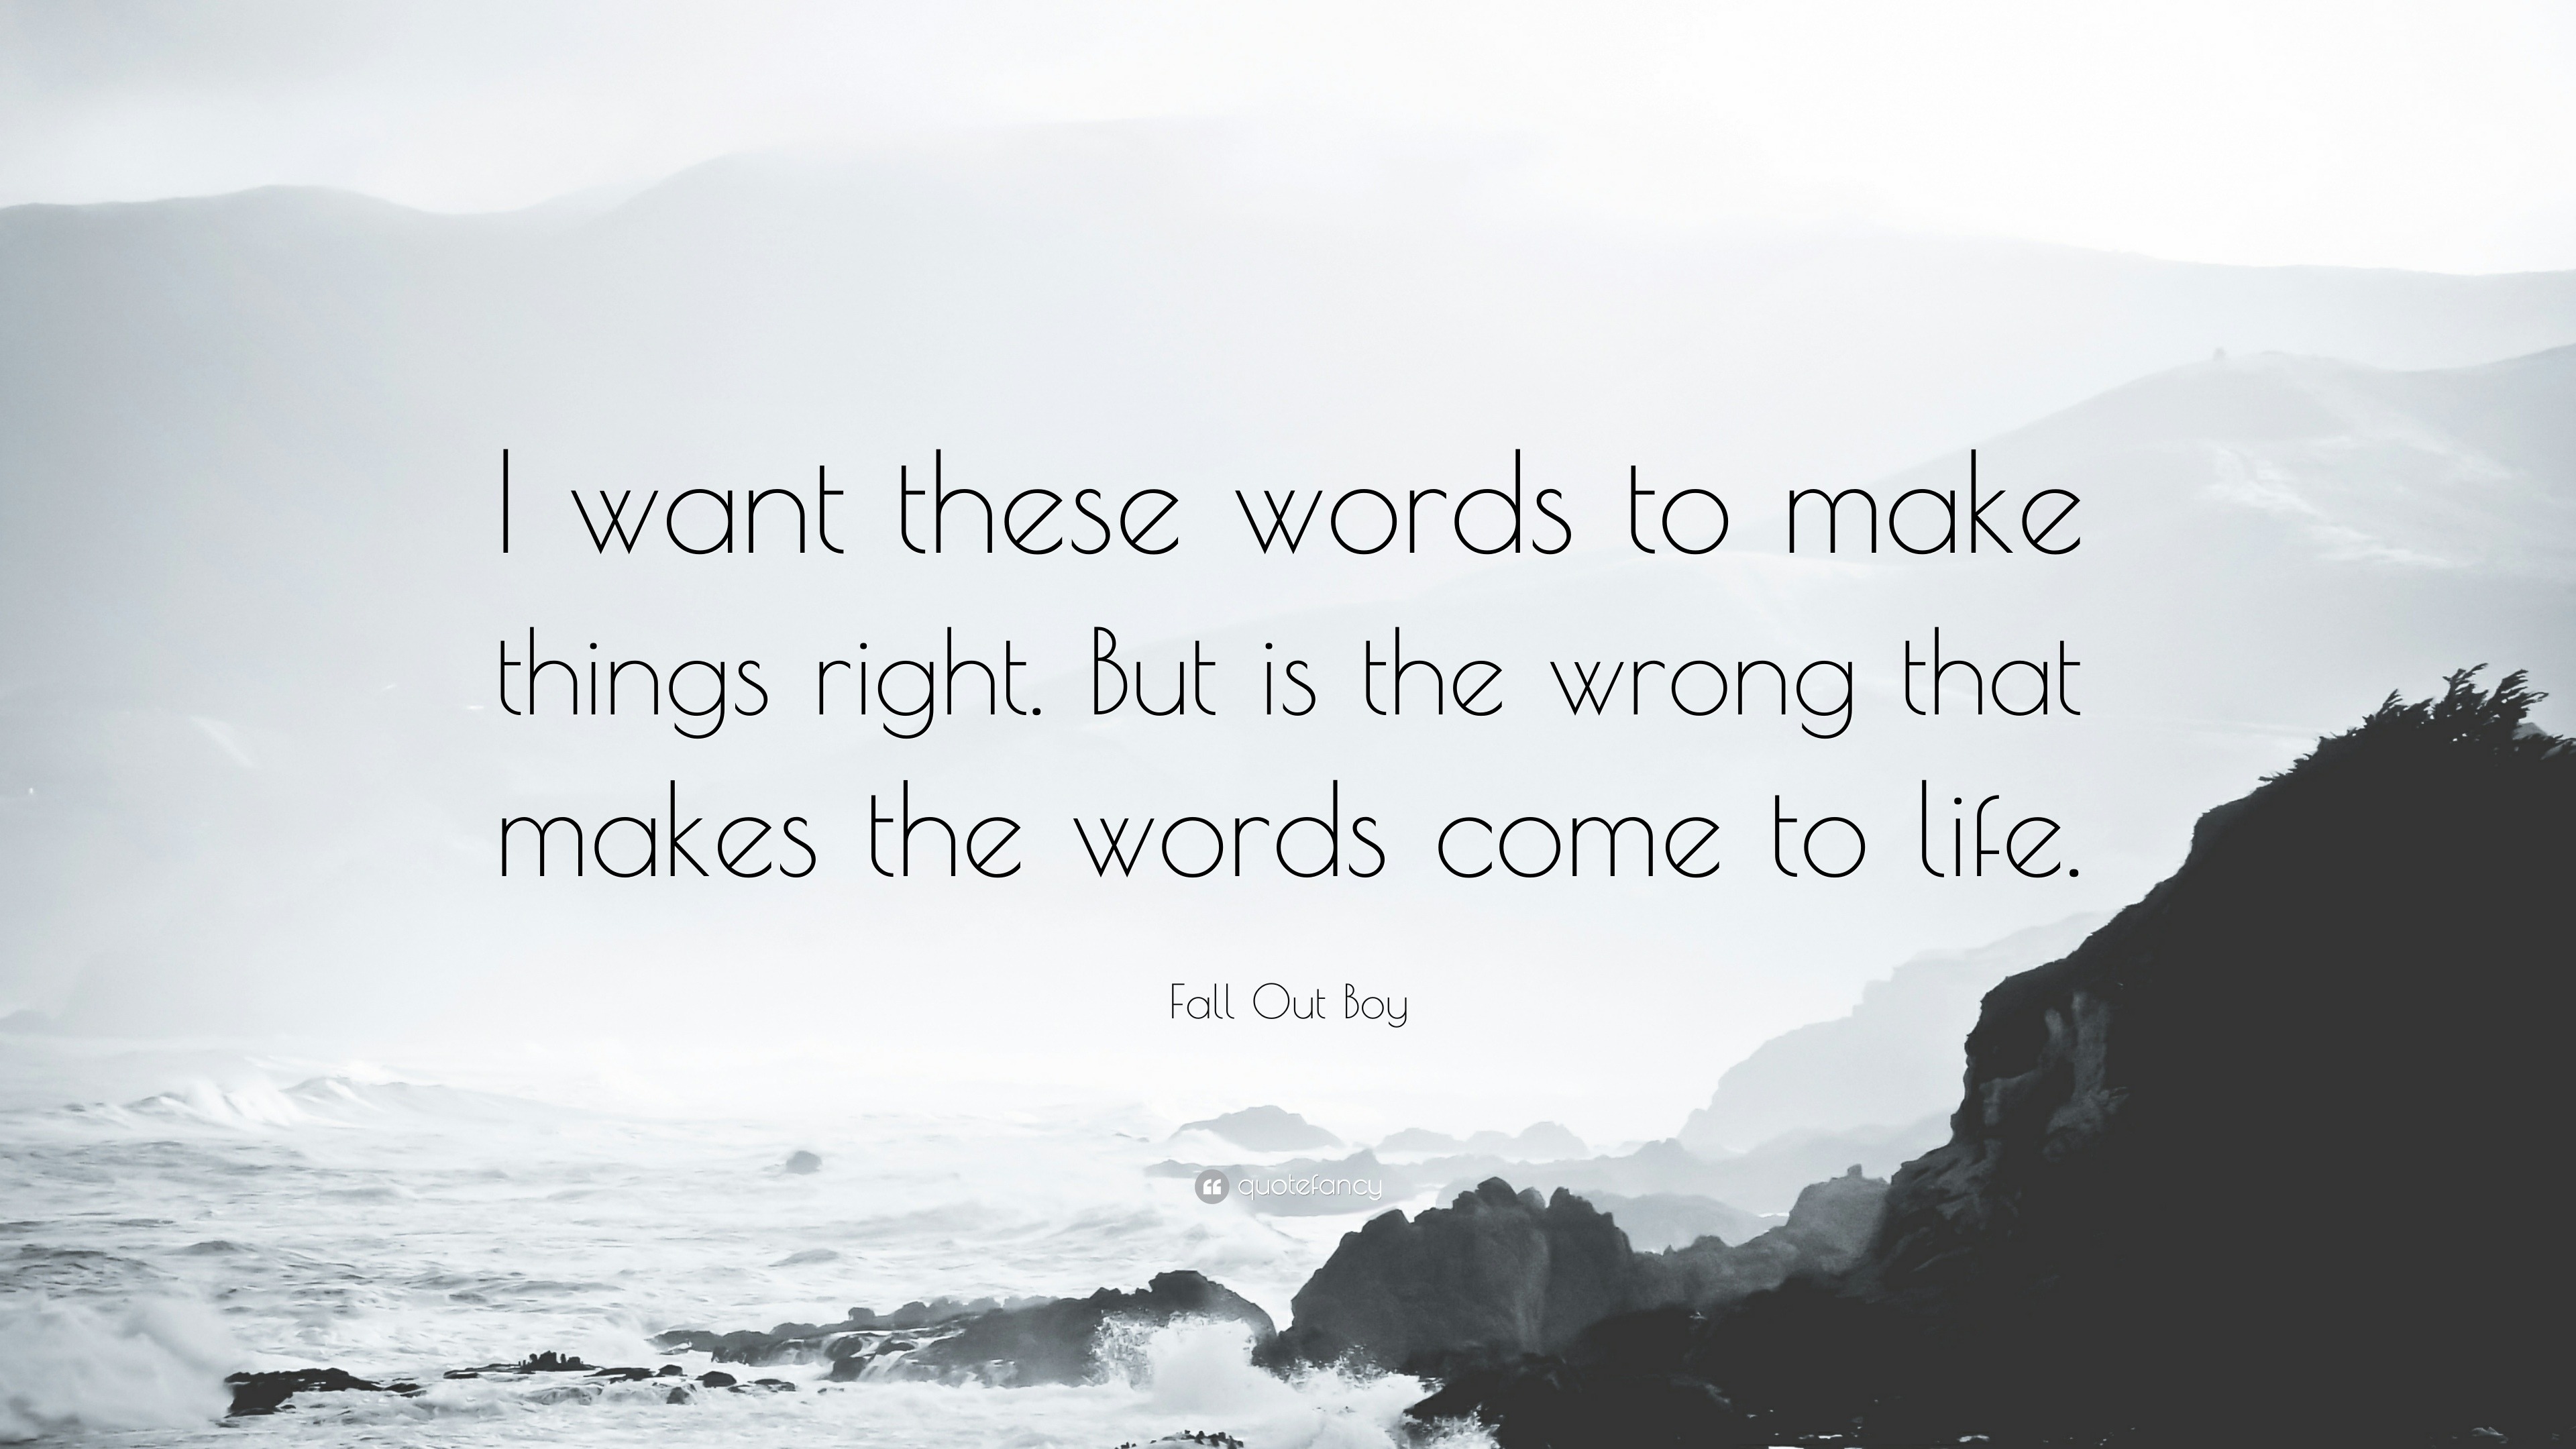 Fall Out Boy Quote: “I Want These Words To Make Things Right. But Is The Wrong